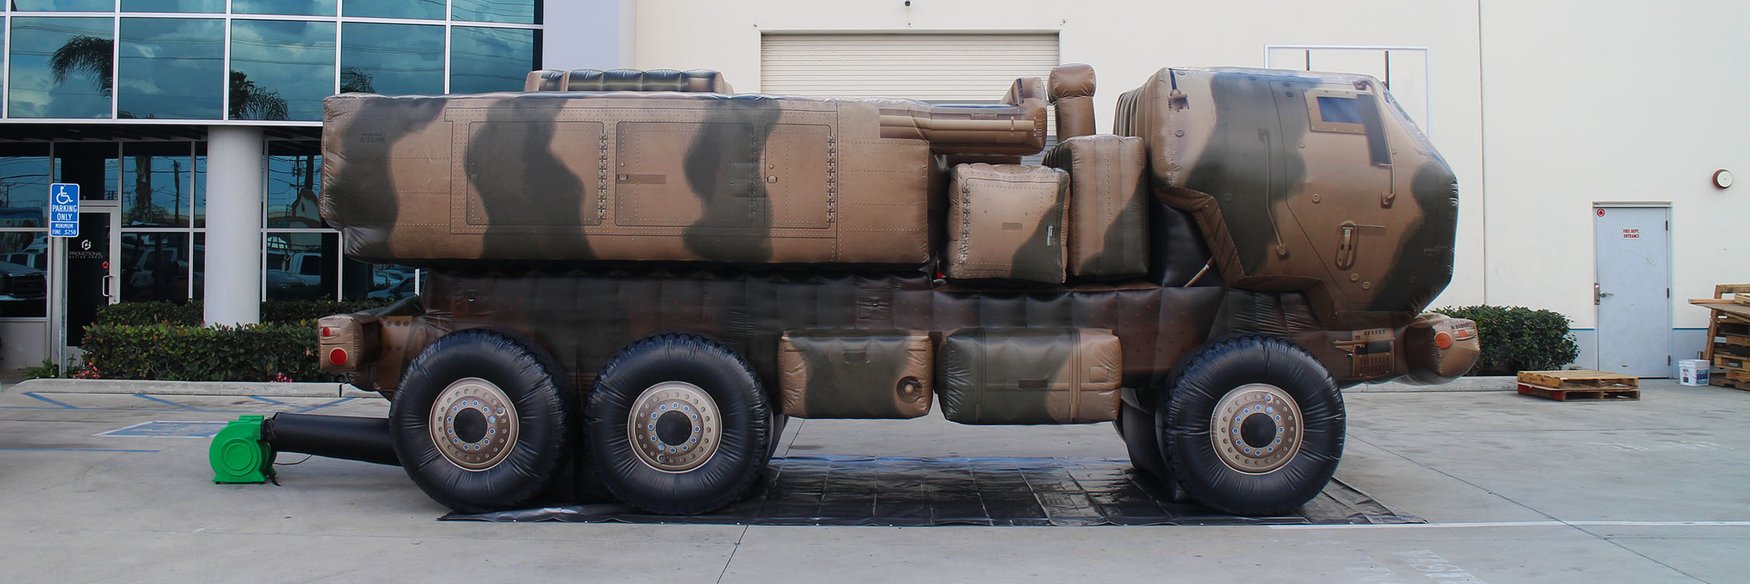 military-truck-replica-inflatable